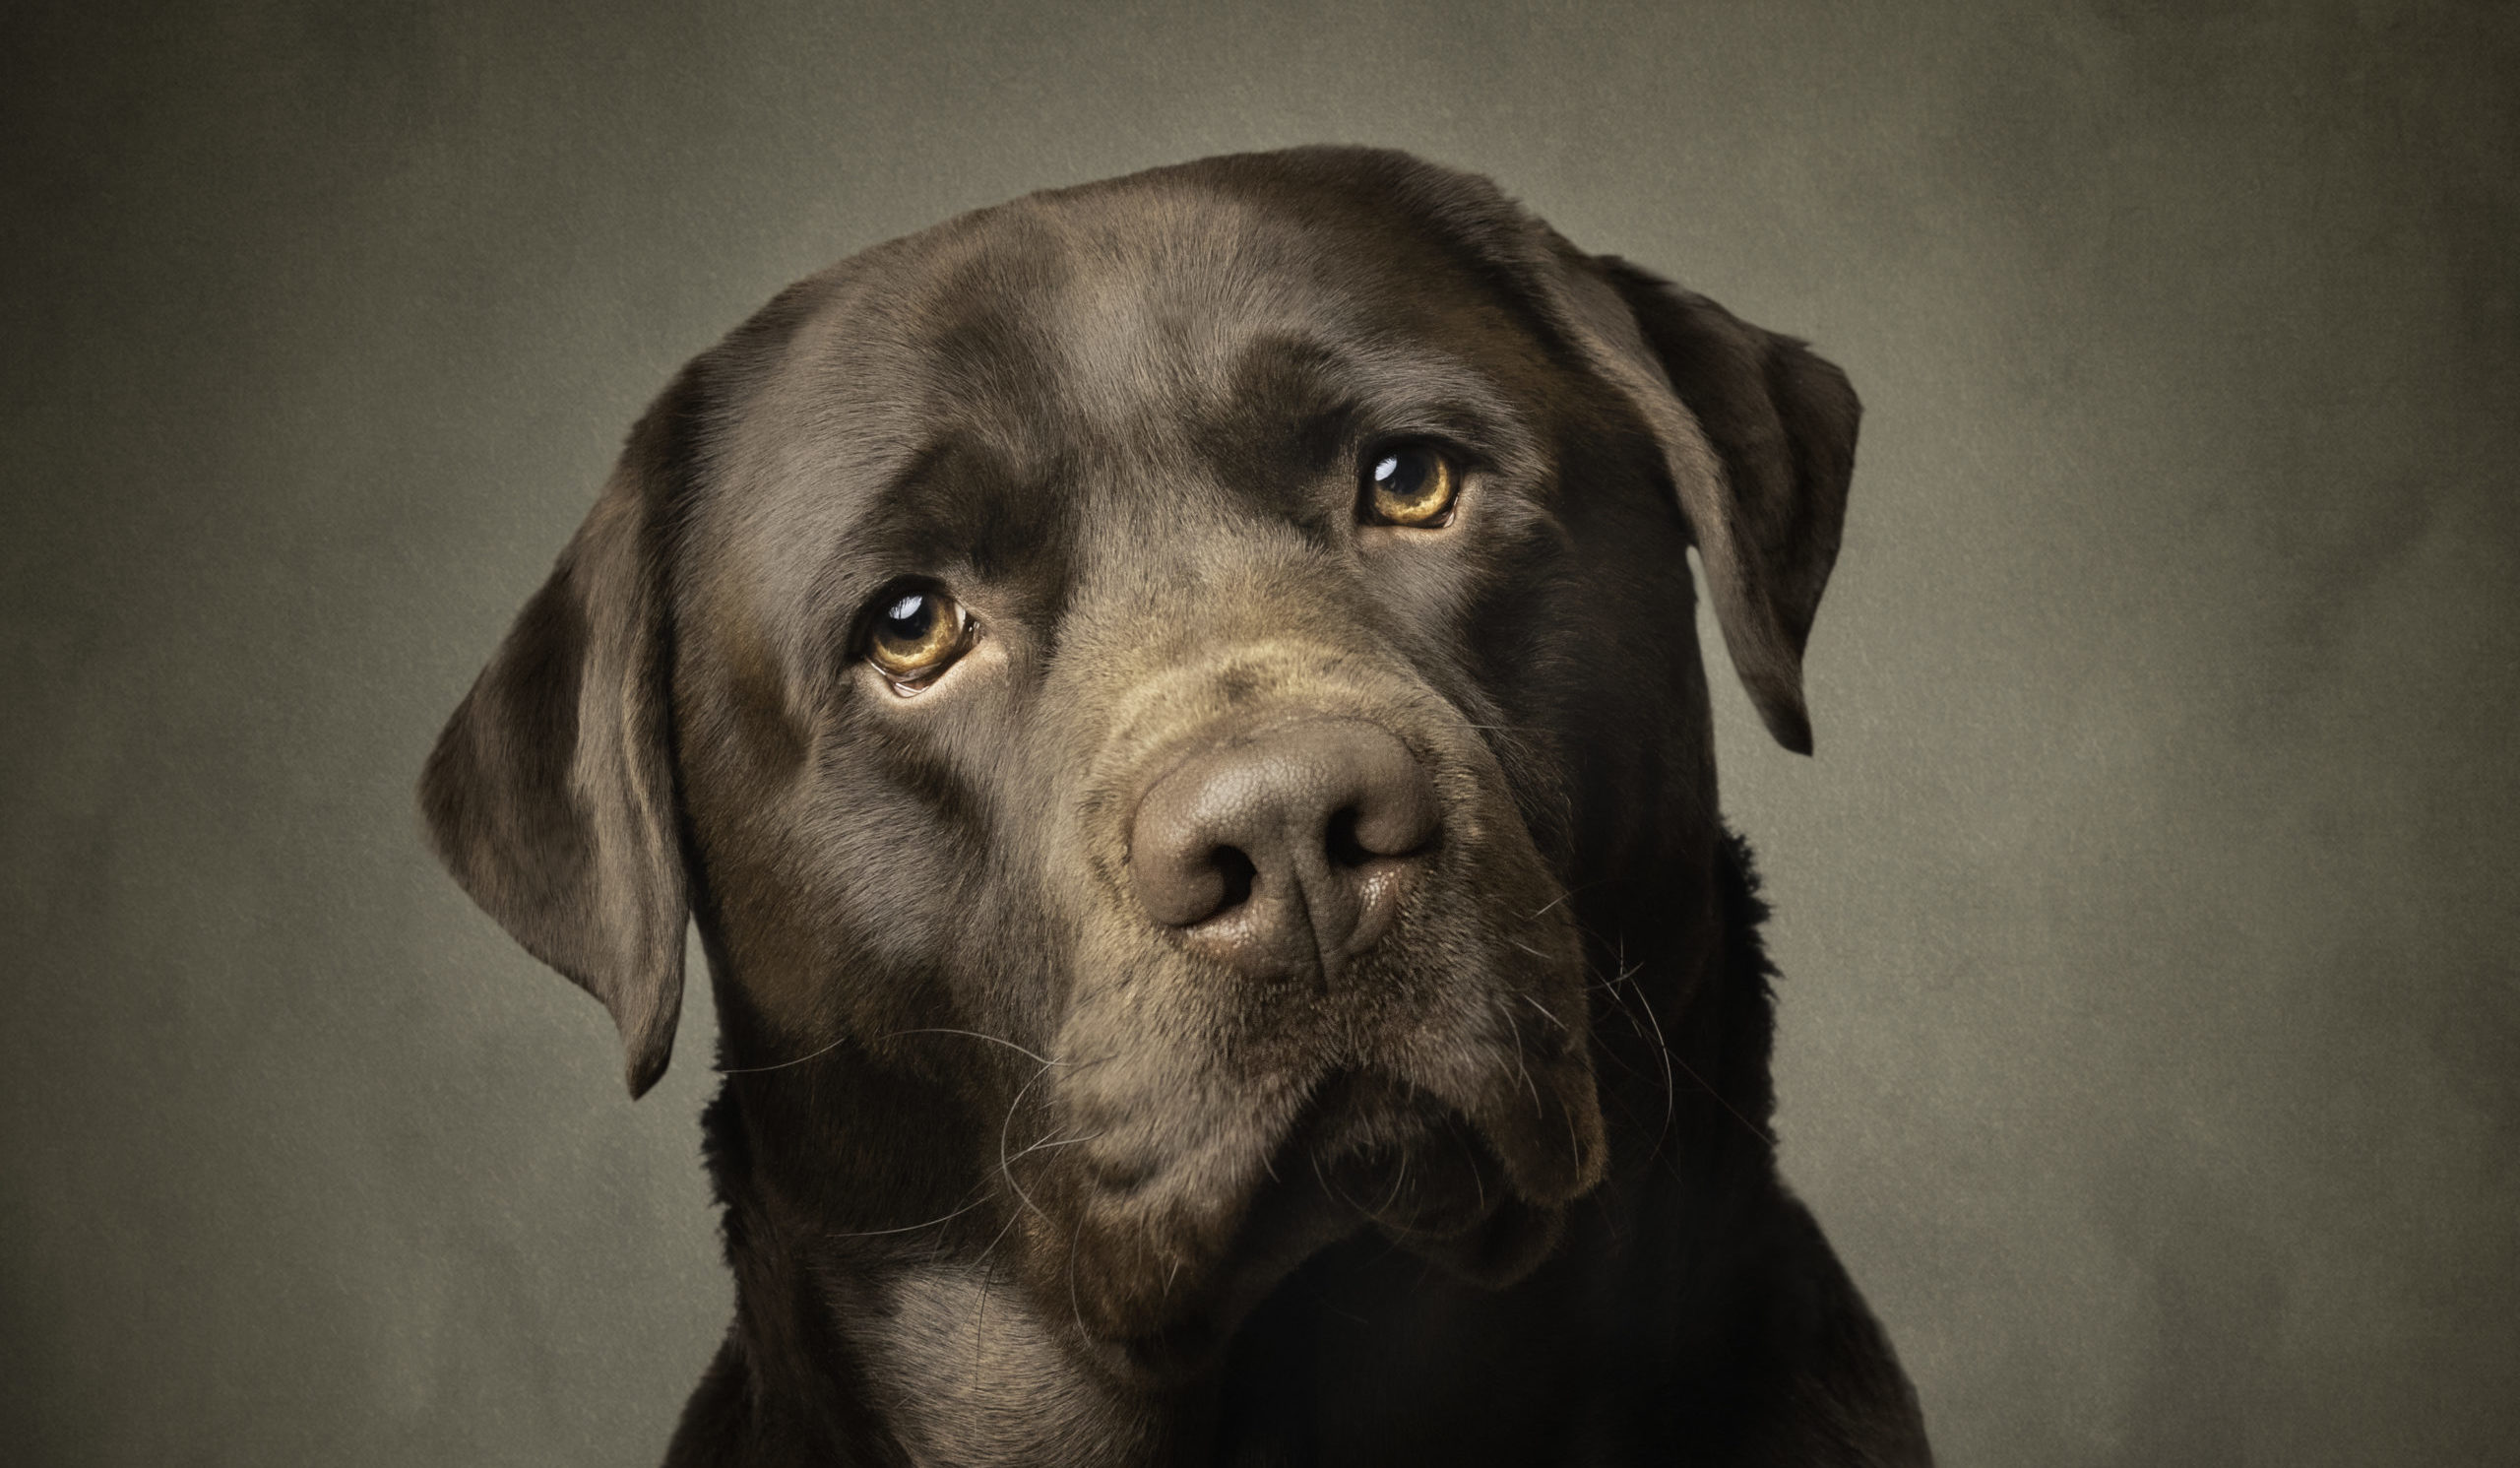 Gun Dog Chocolate Labrador dog having a studio pet photography session with Dawn Hilton Photography, based in Melton Mowbray, Leicestershire